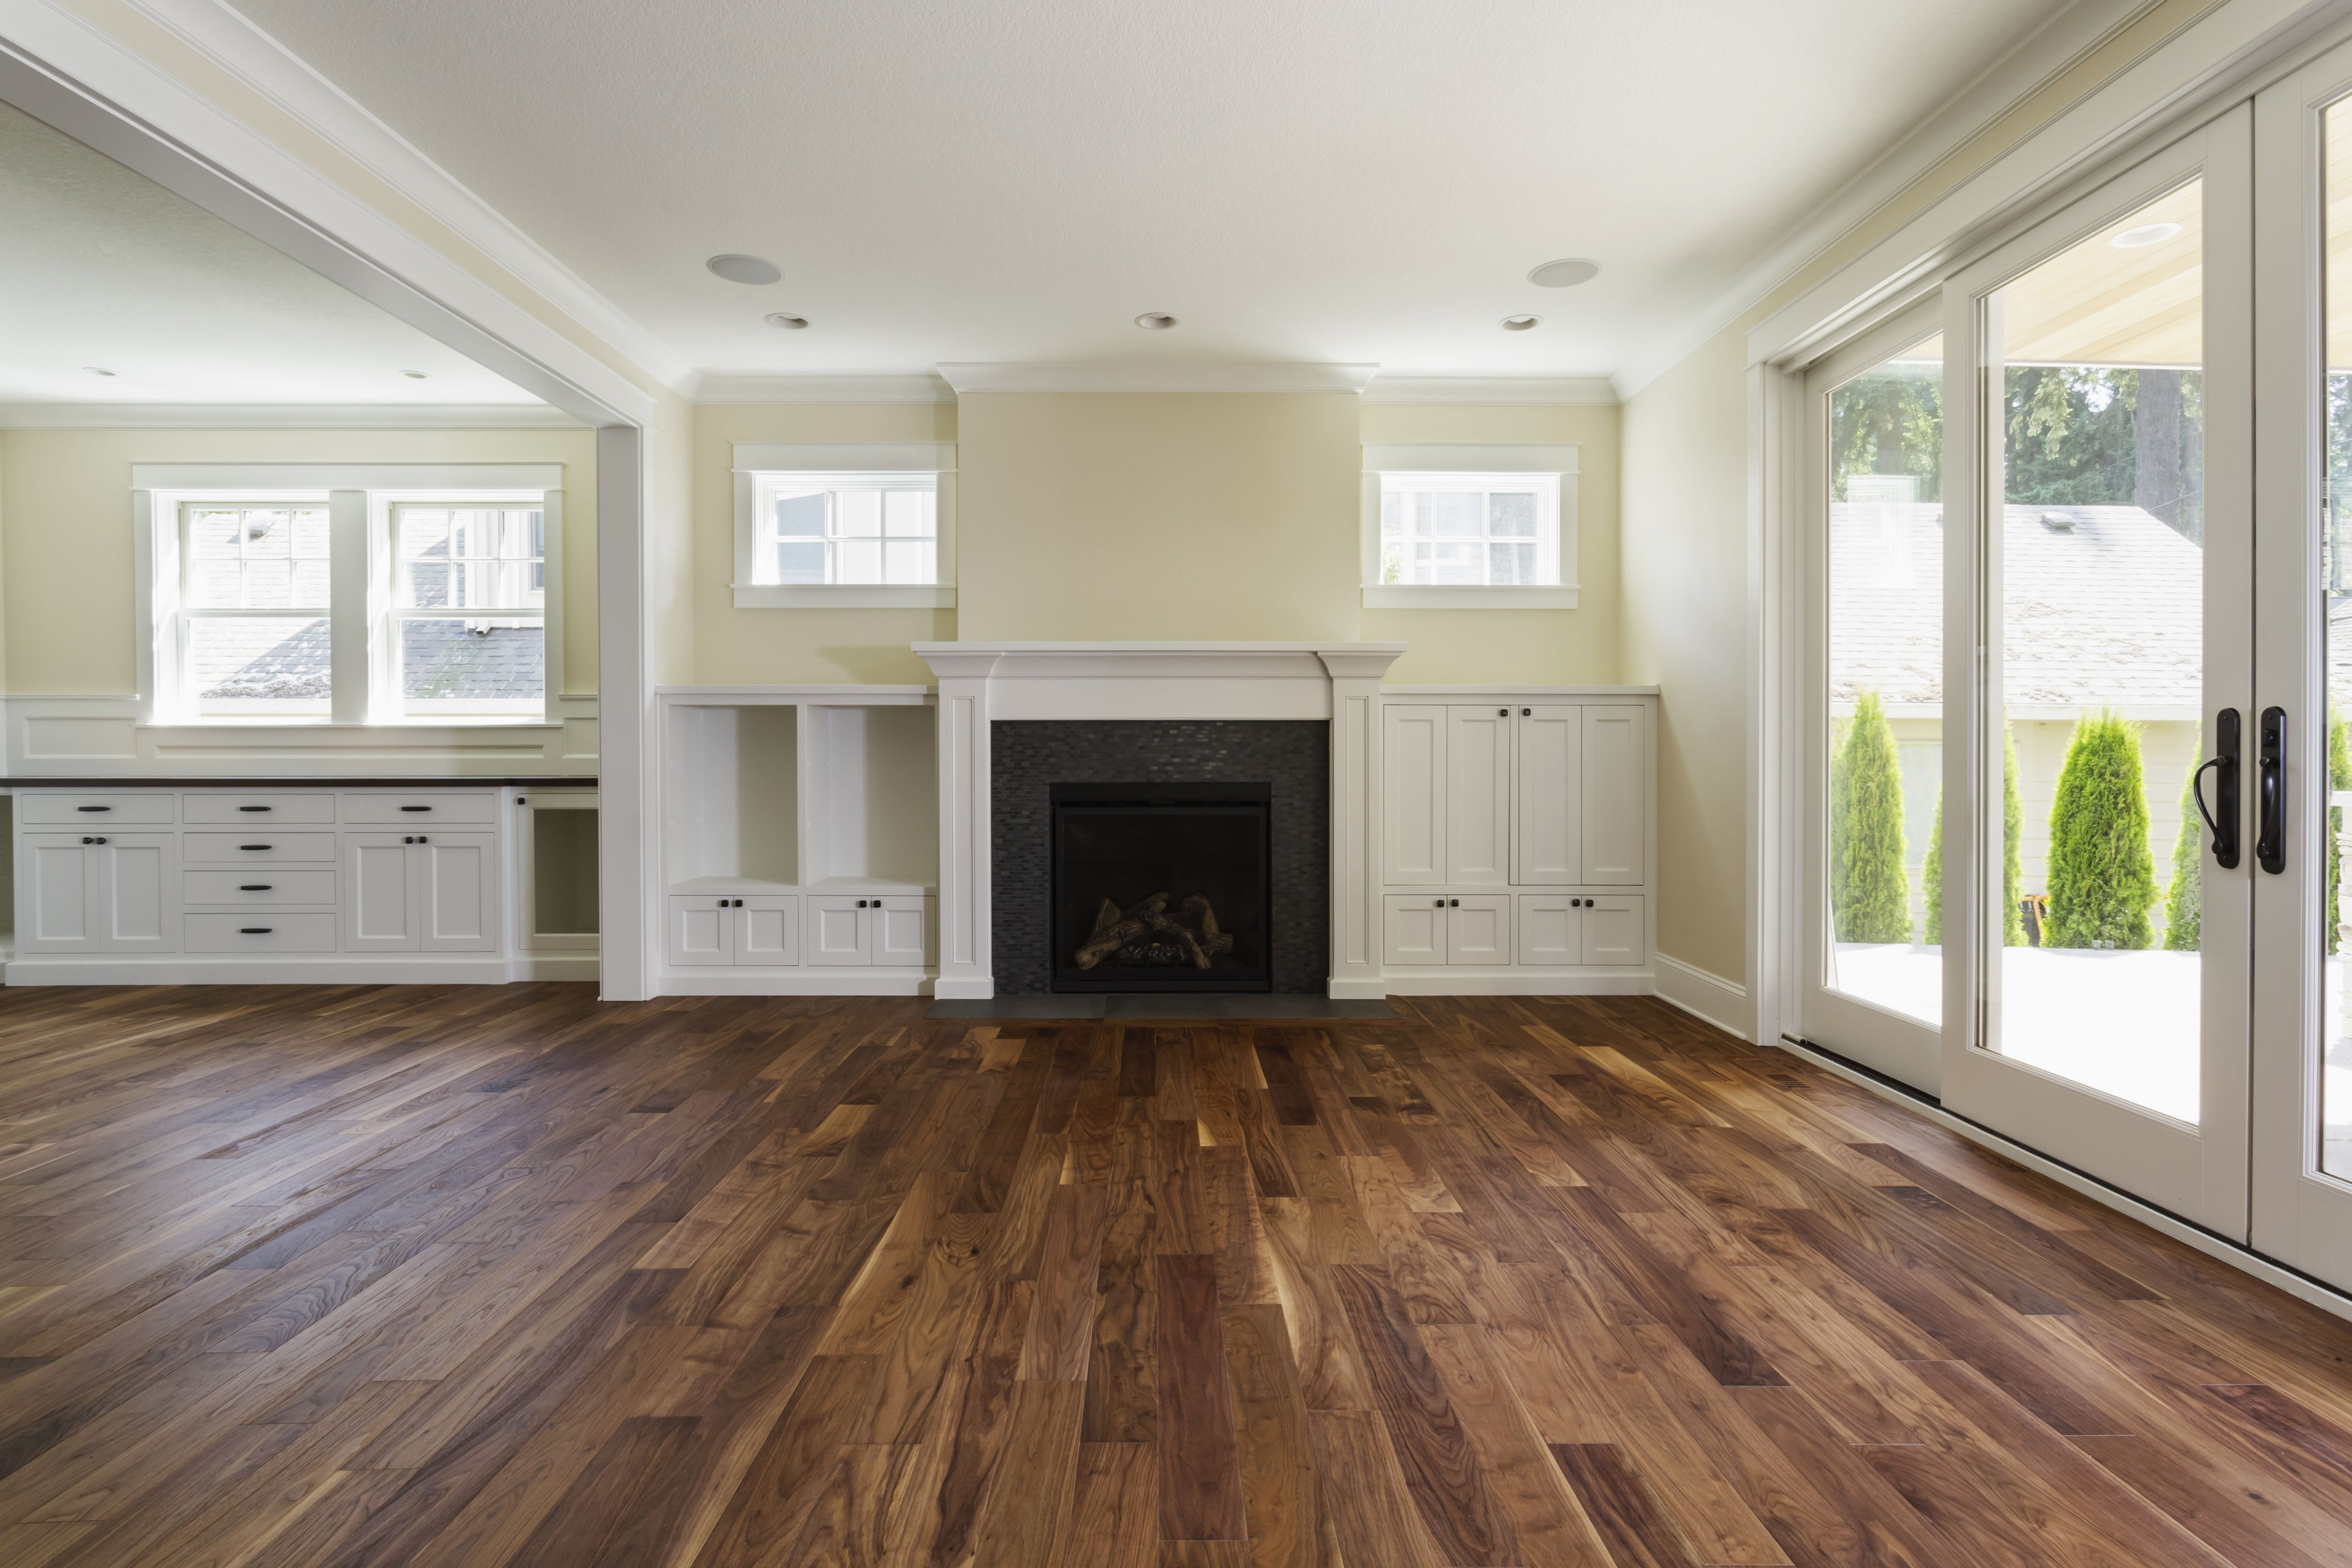 16 Famous where to Buy Bruce Hardwood Laminate Floor Cleaner 2024 free download where to buy bruce hardwood laminate floor cleaner of the pros and cons of prefinished hardwood flooring with fireplace and built in shelves in living room 482143011 57bef8e33df78cc16e035397